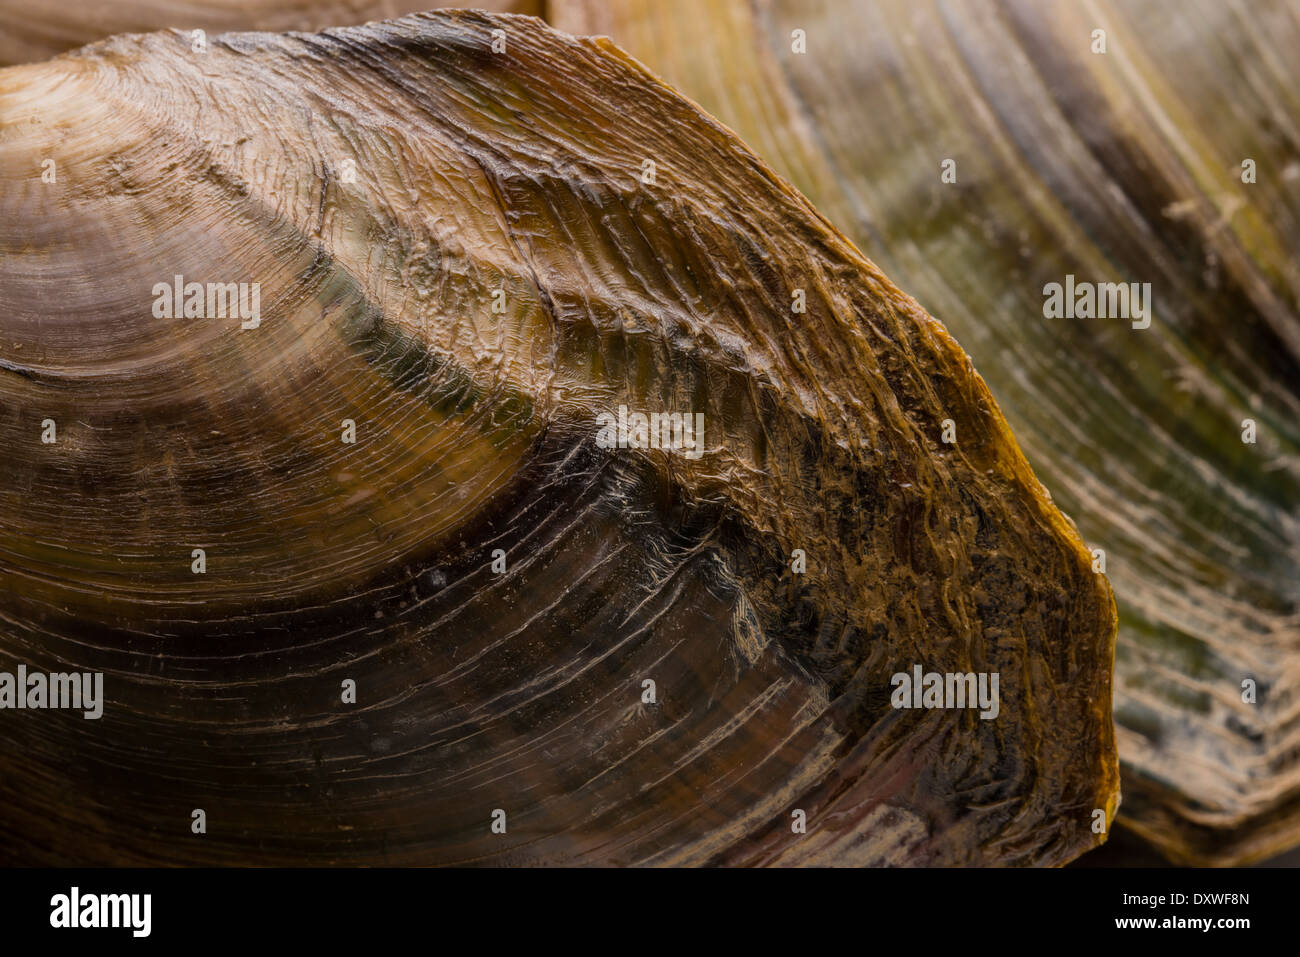 Chinese Pond Mussel (Sinanodonta woodiana), large freshwater mussel which is an invasive species to Europe, Spain. Growth marks in outer shell. Stock Photo